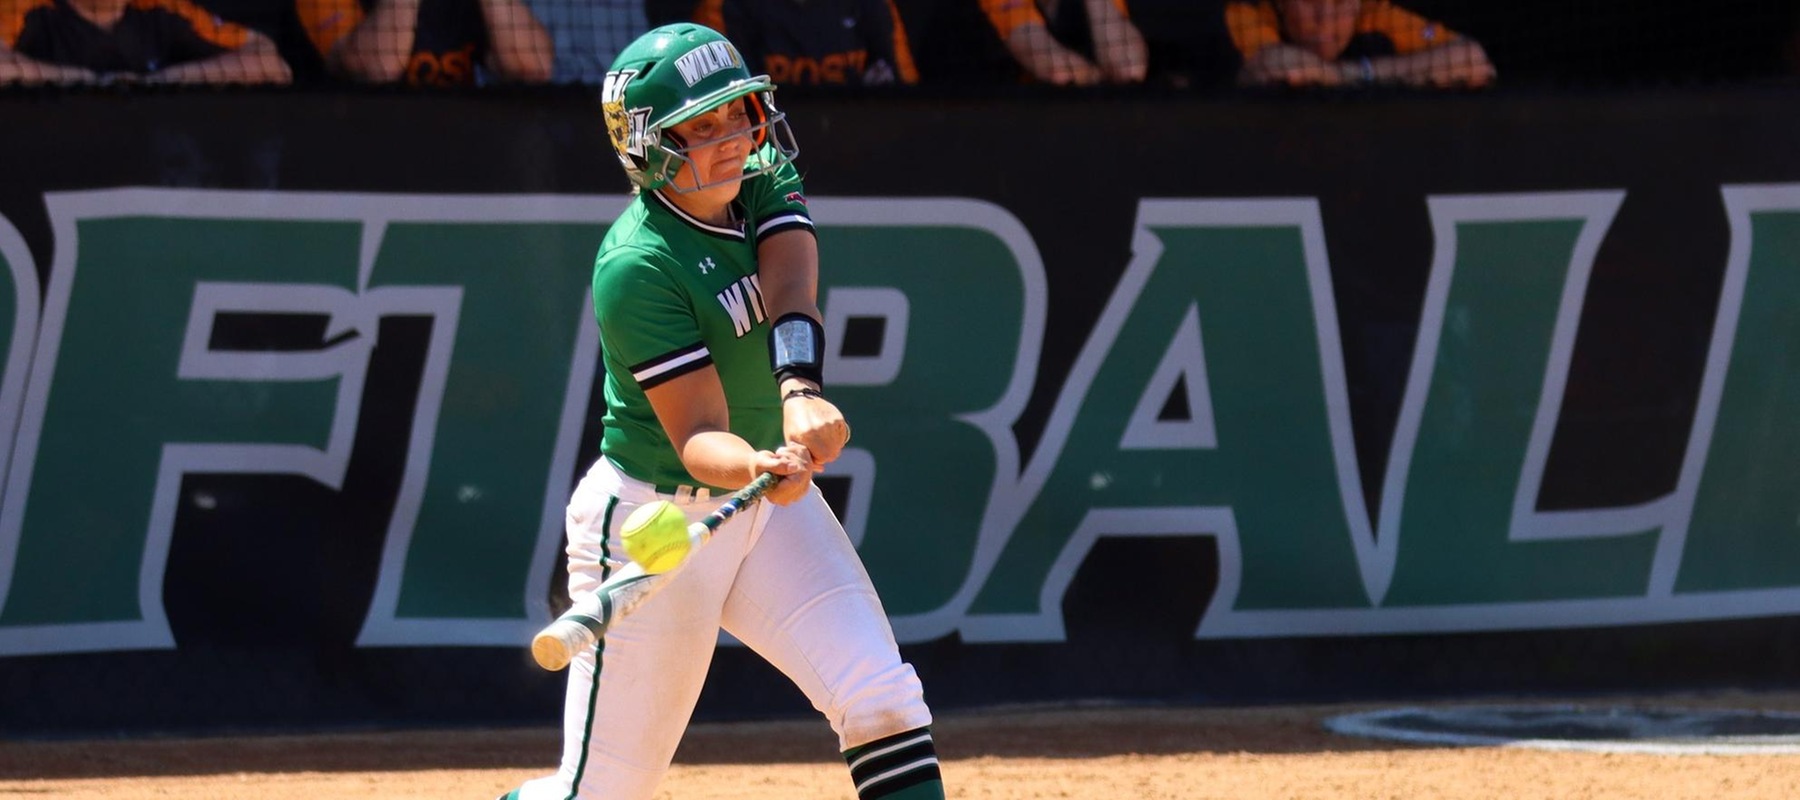 File photo of Haley Downin who doubled in game one and had two hit in game two at Dominican. Copyright 2022; Wilmington University. All rights reserved. Photo by Dan Lauletta. April 15, 2022 vs. Post.